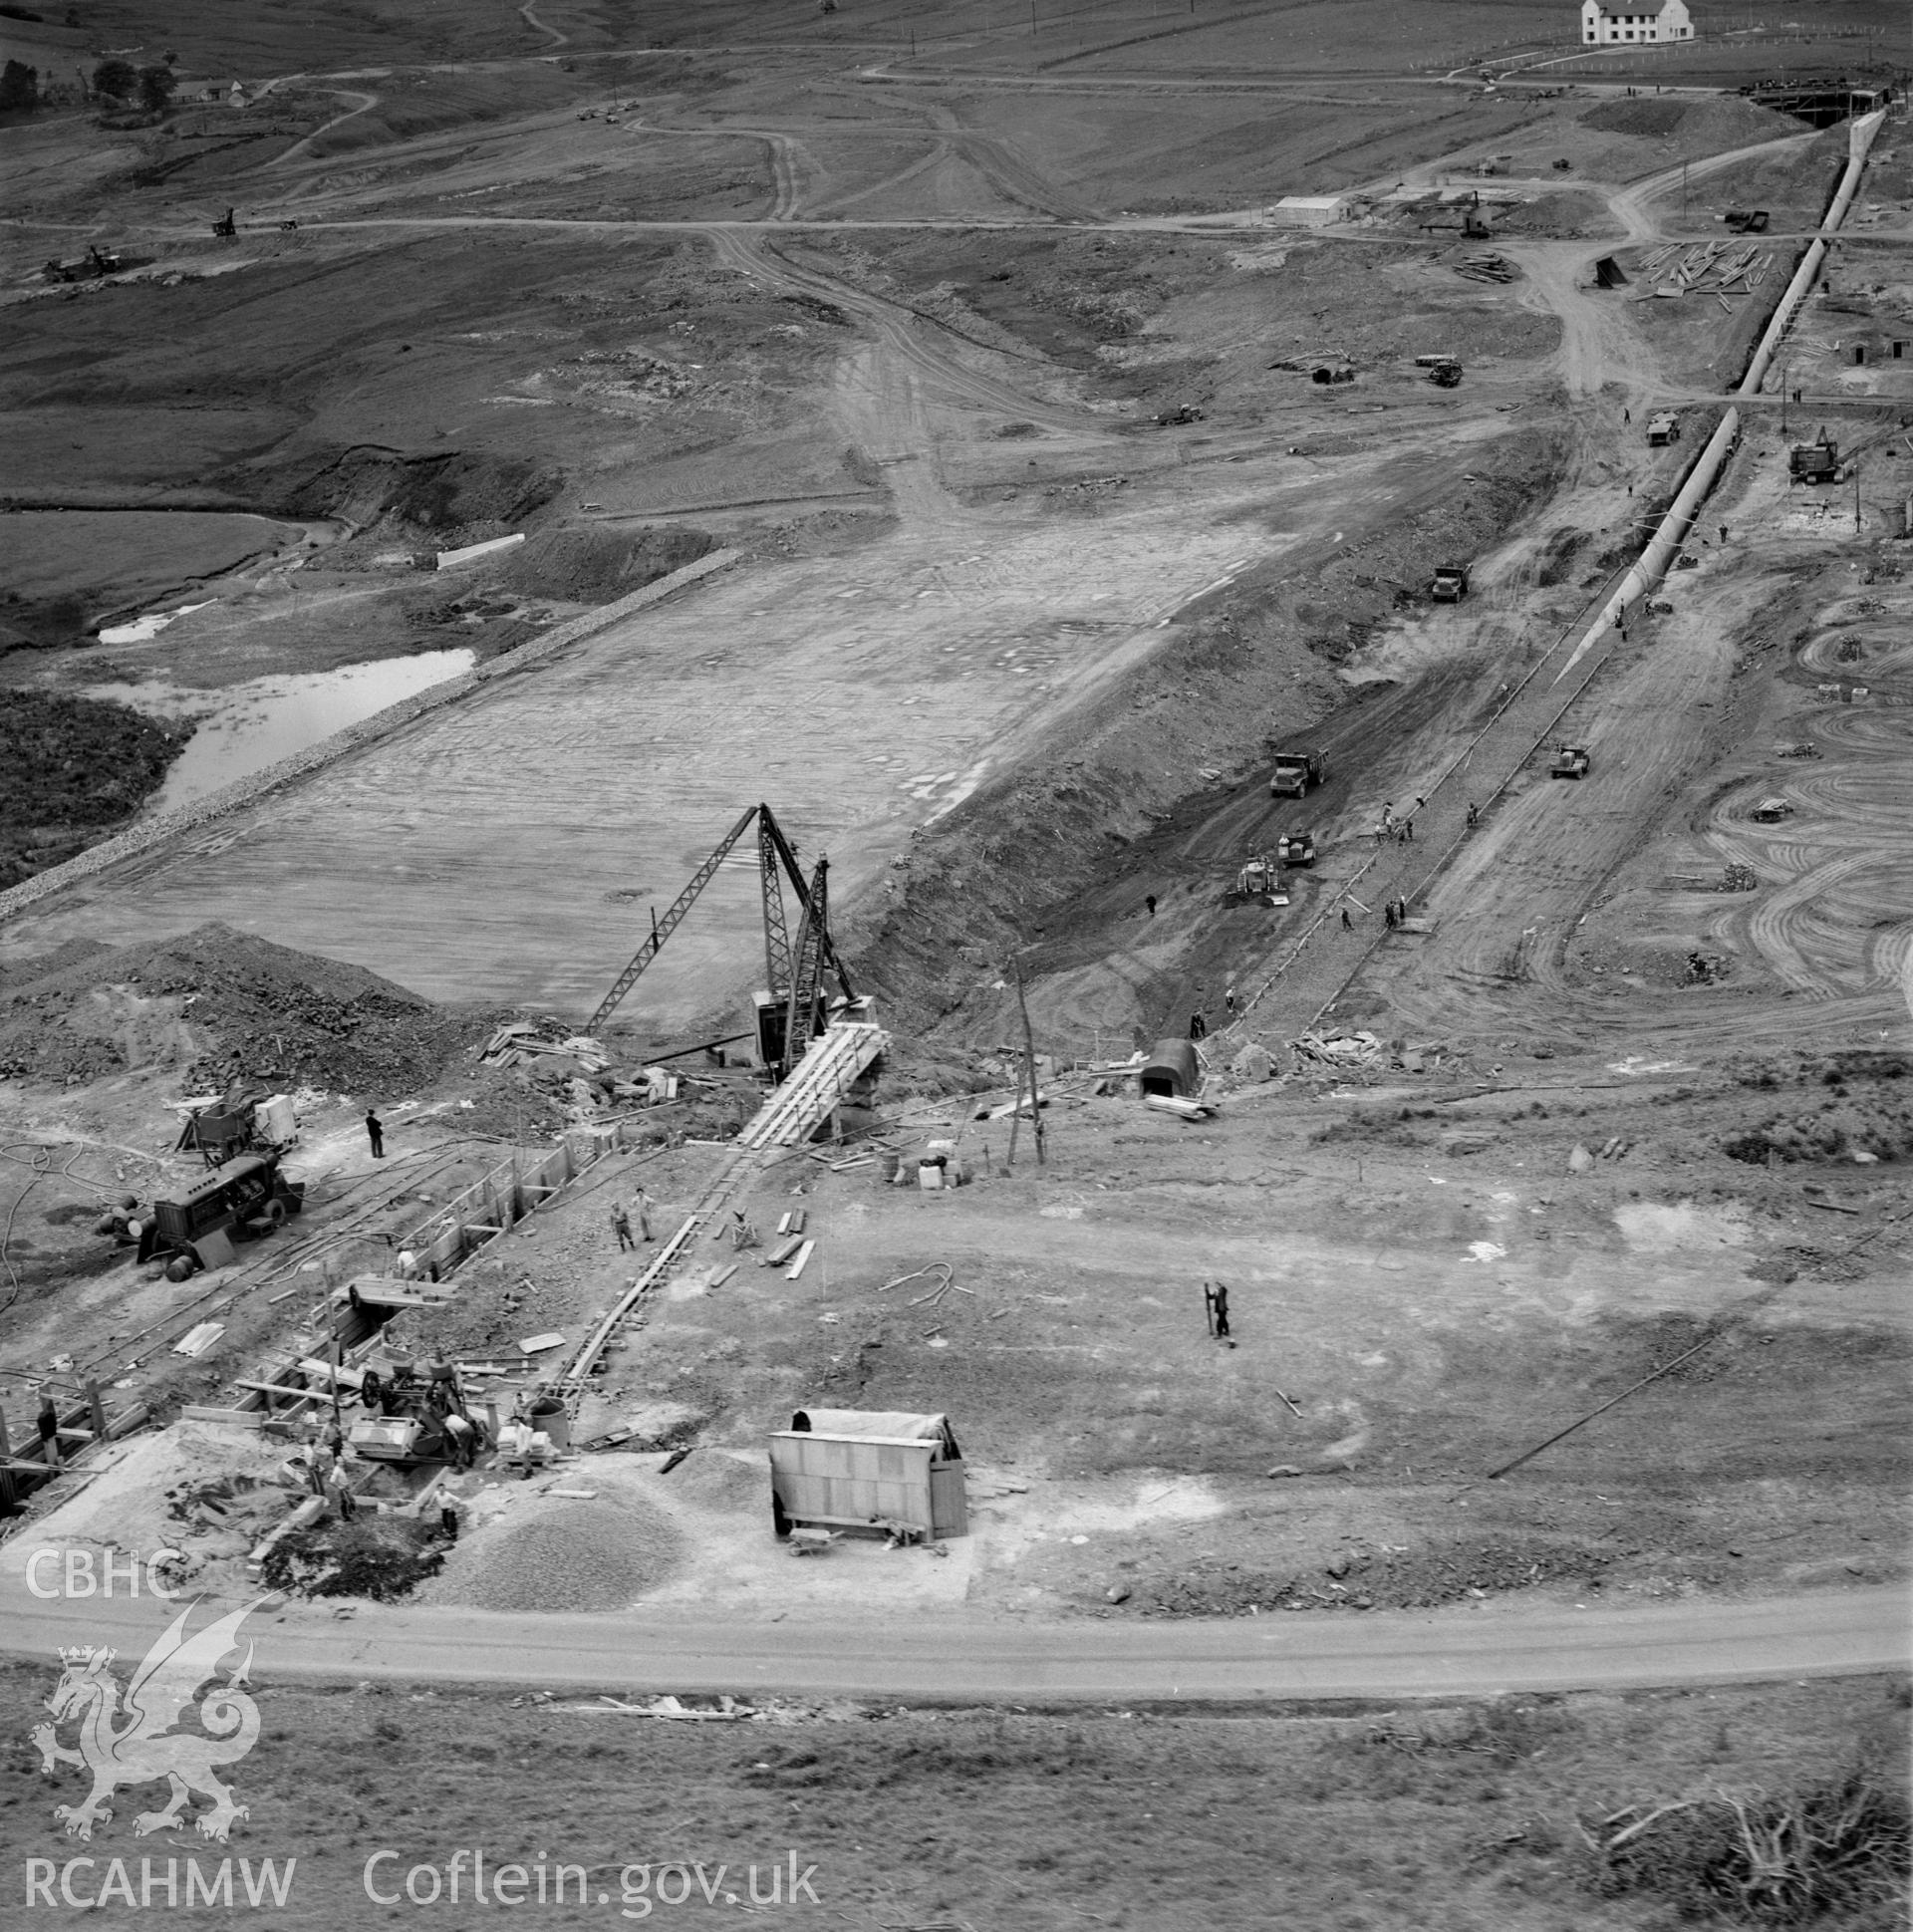 View of site during the construction of Usk Reservoir